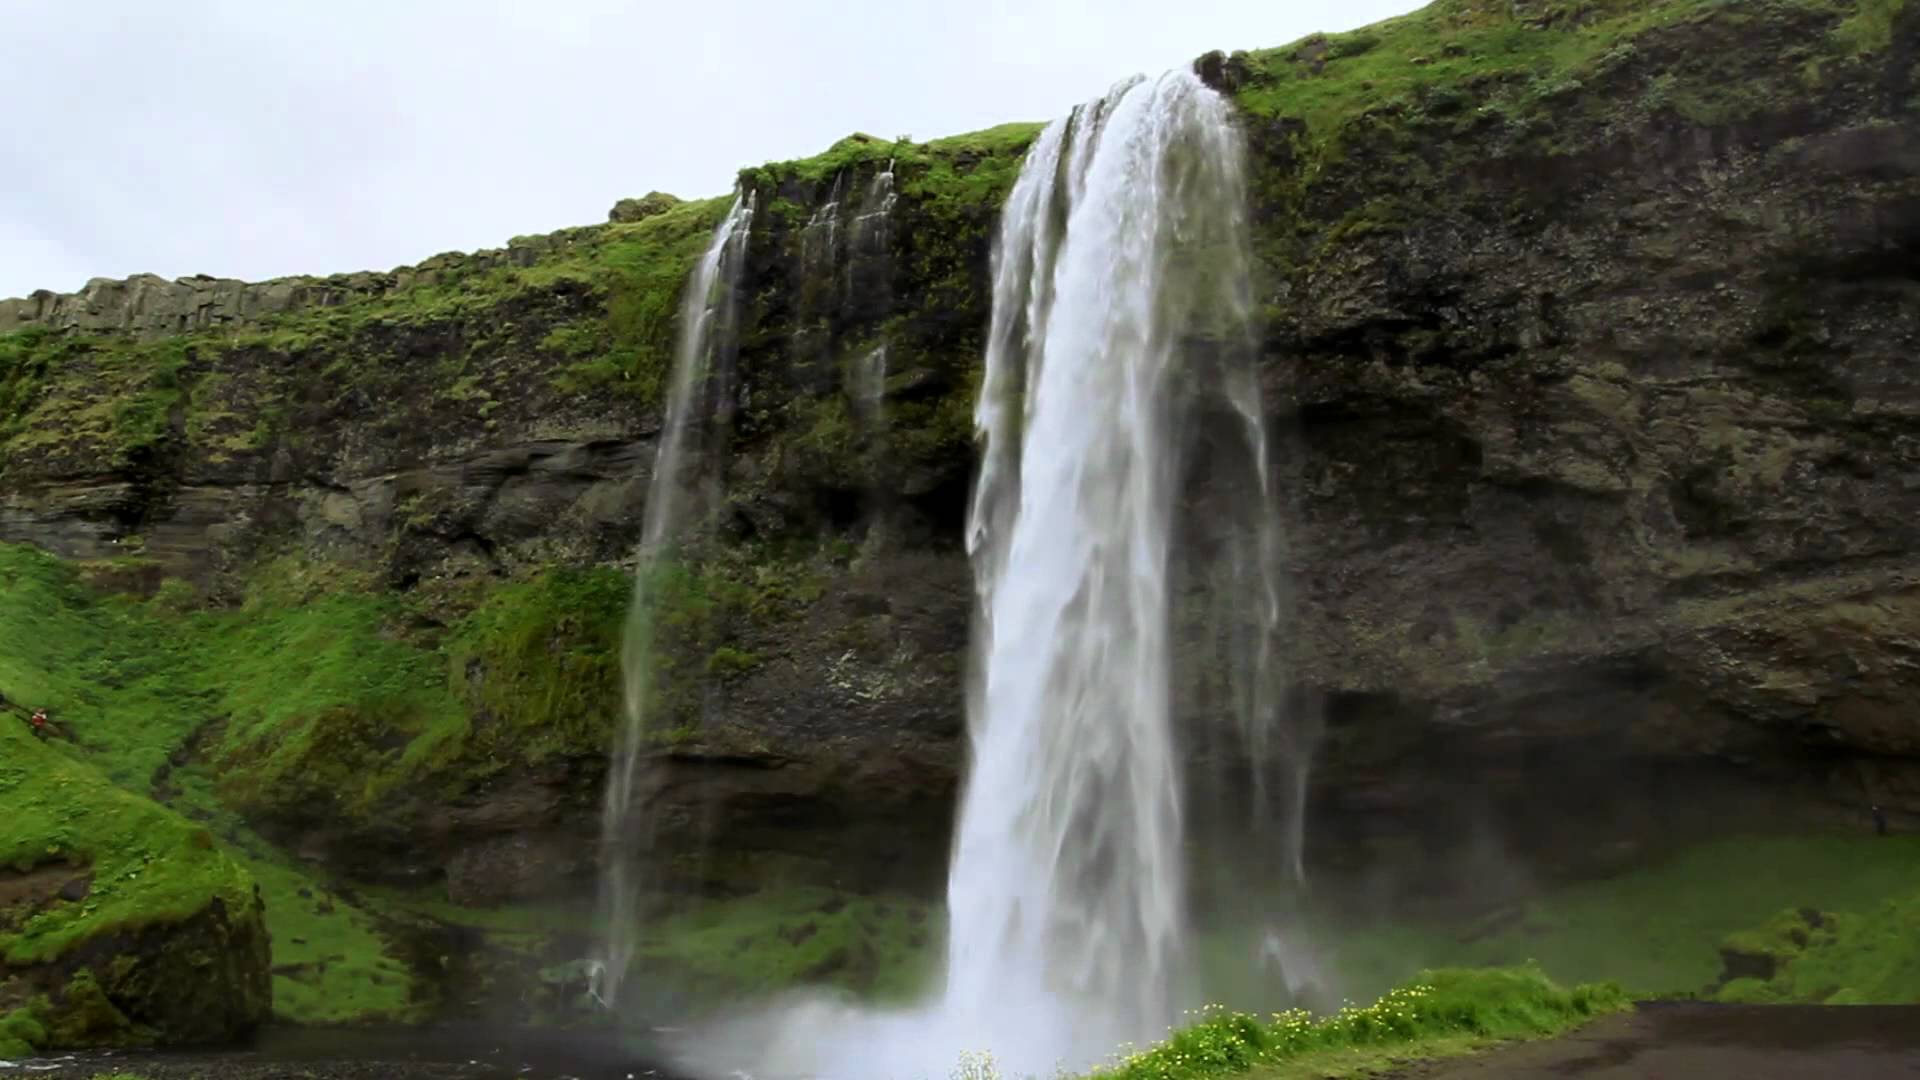 30 minutes of running water white noise - Iceland's Seljaland ...